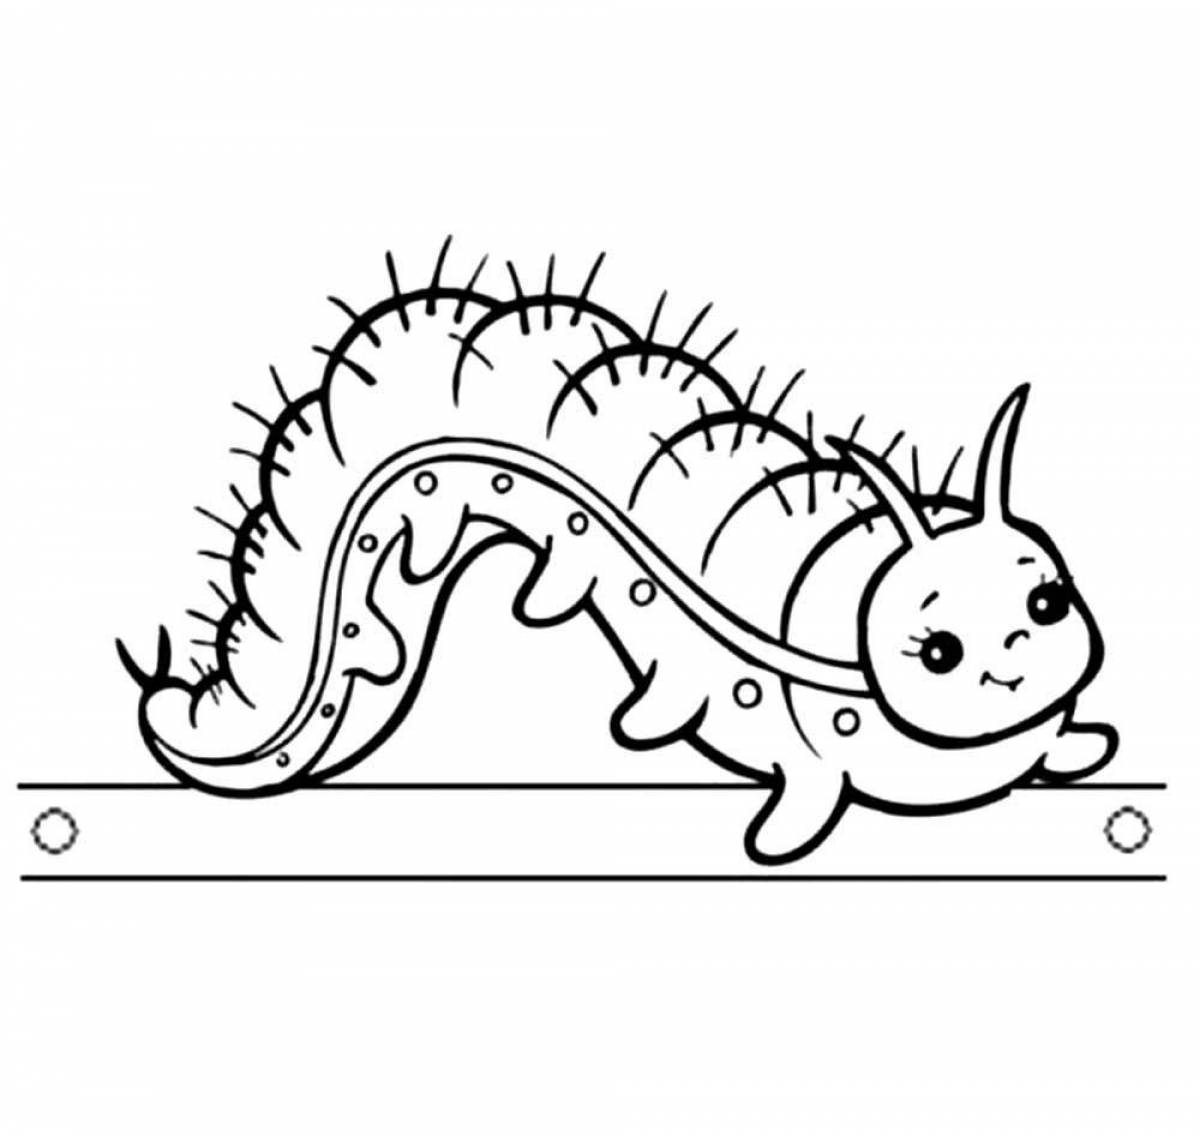 Fun caterpillar coloring for the little ones